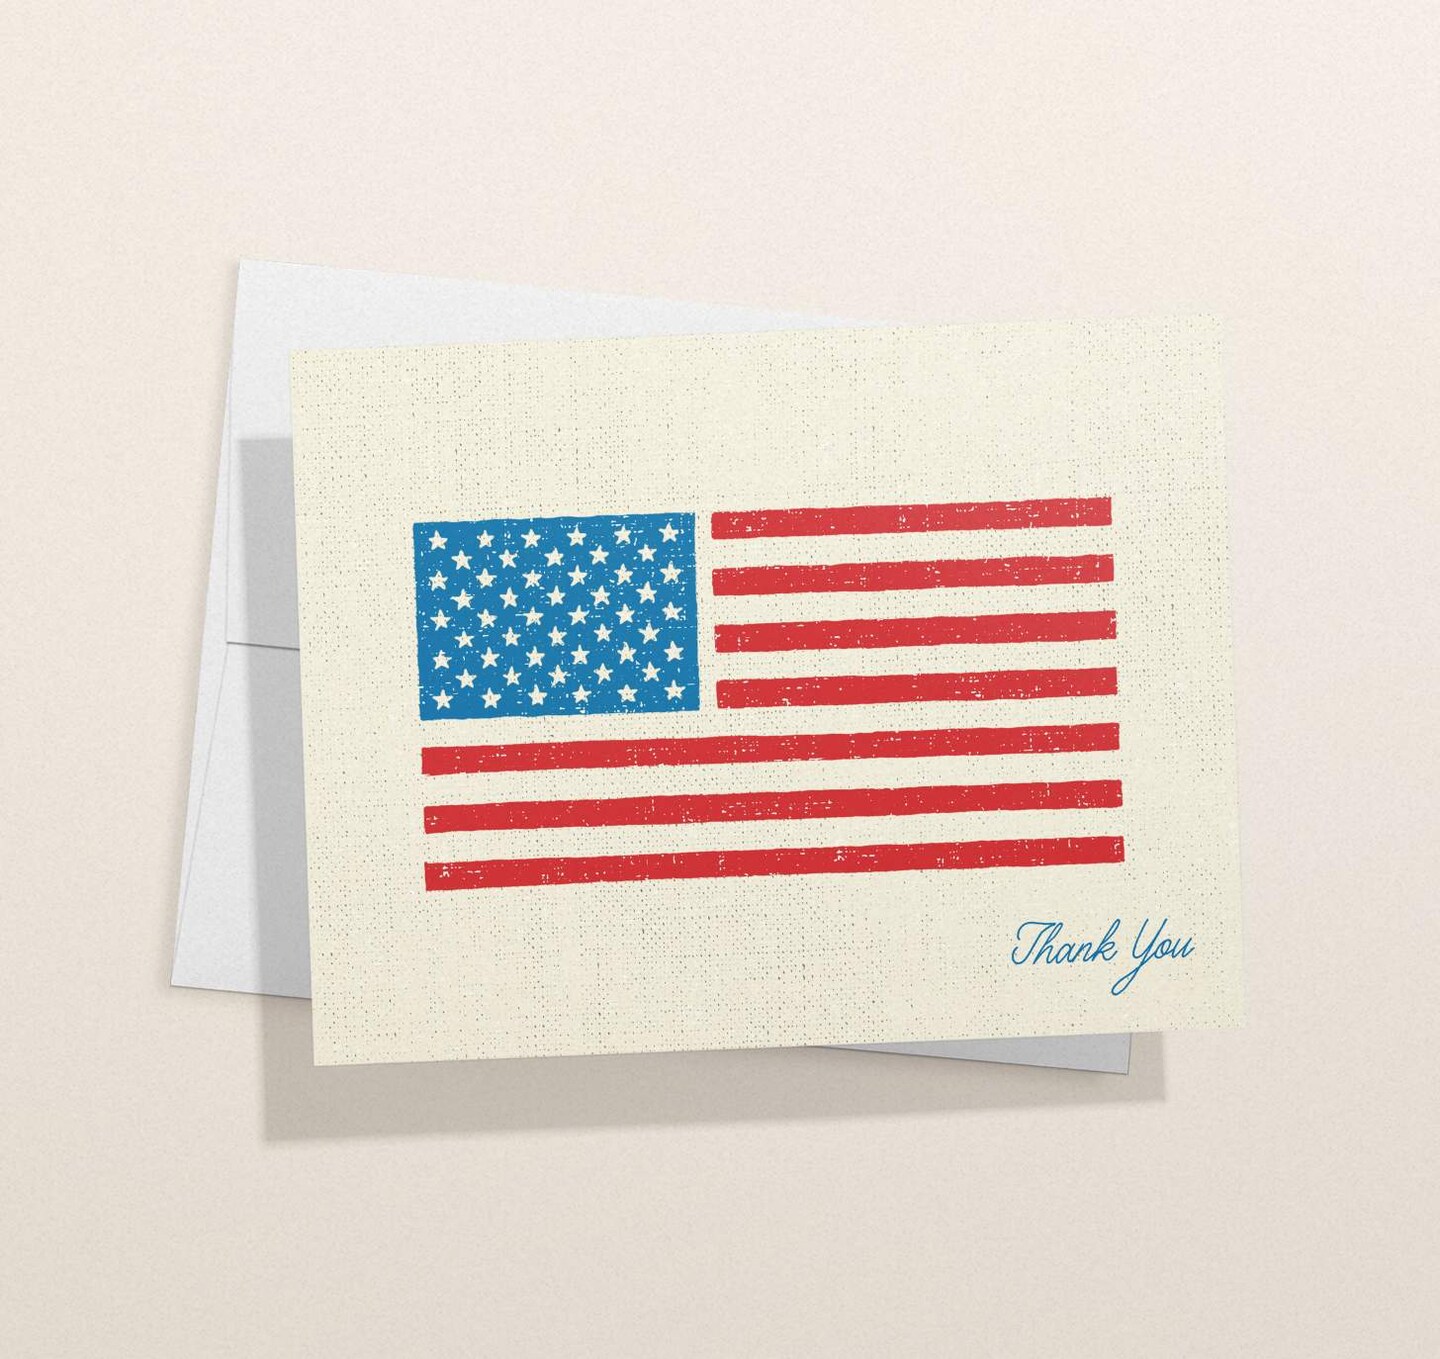 American Flag Thank You Cards | Patriotic Greeting Cards With Envelopes ...